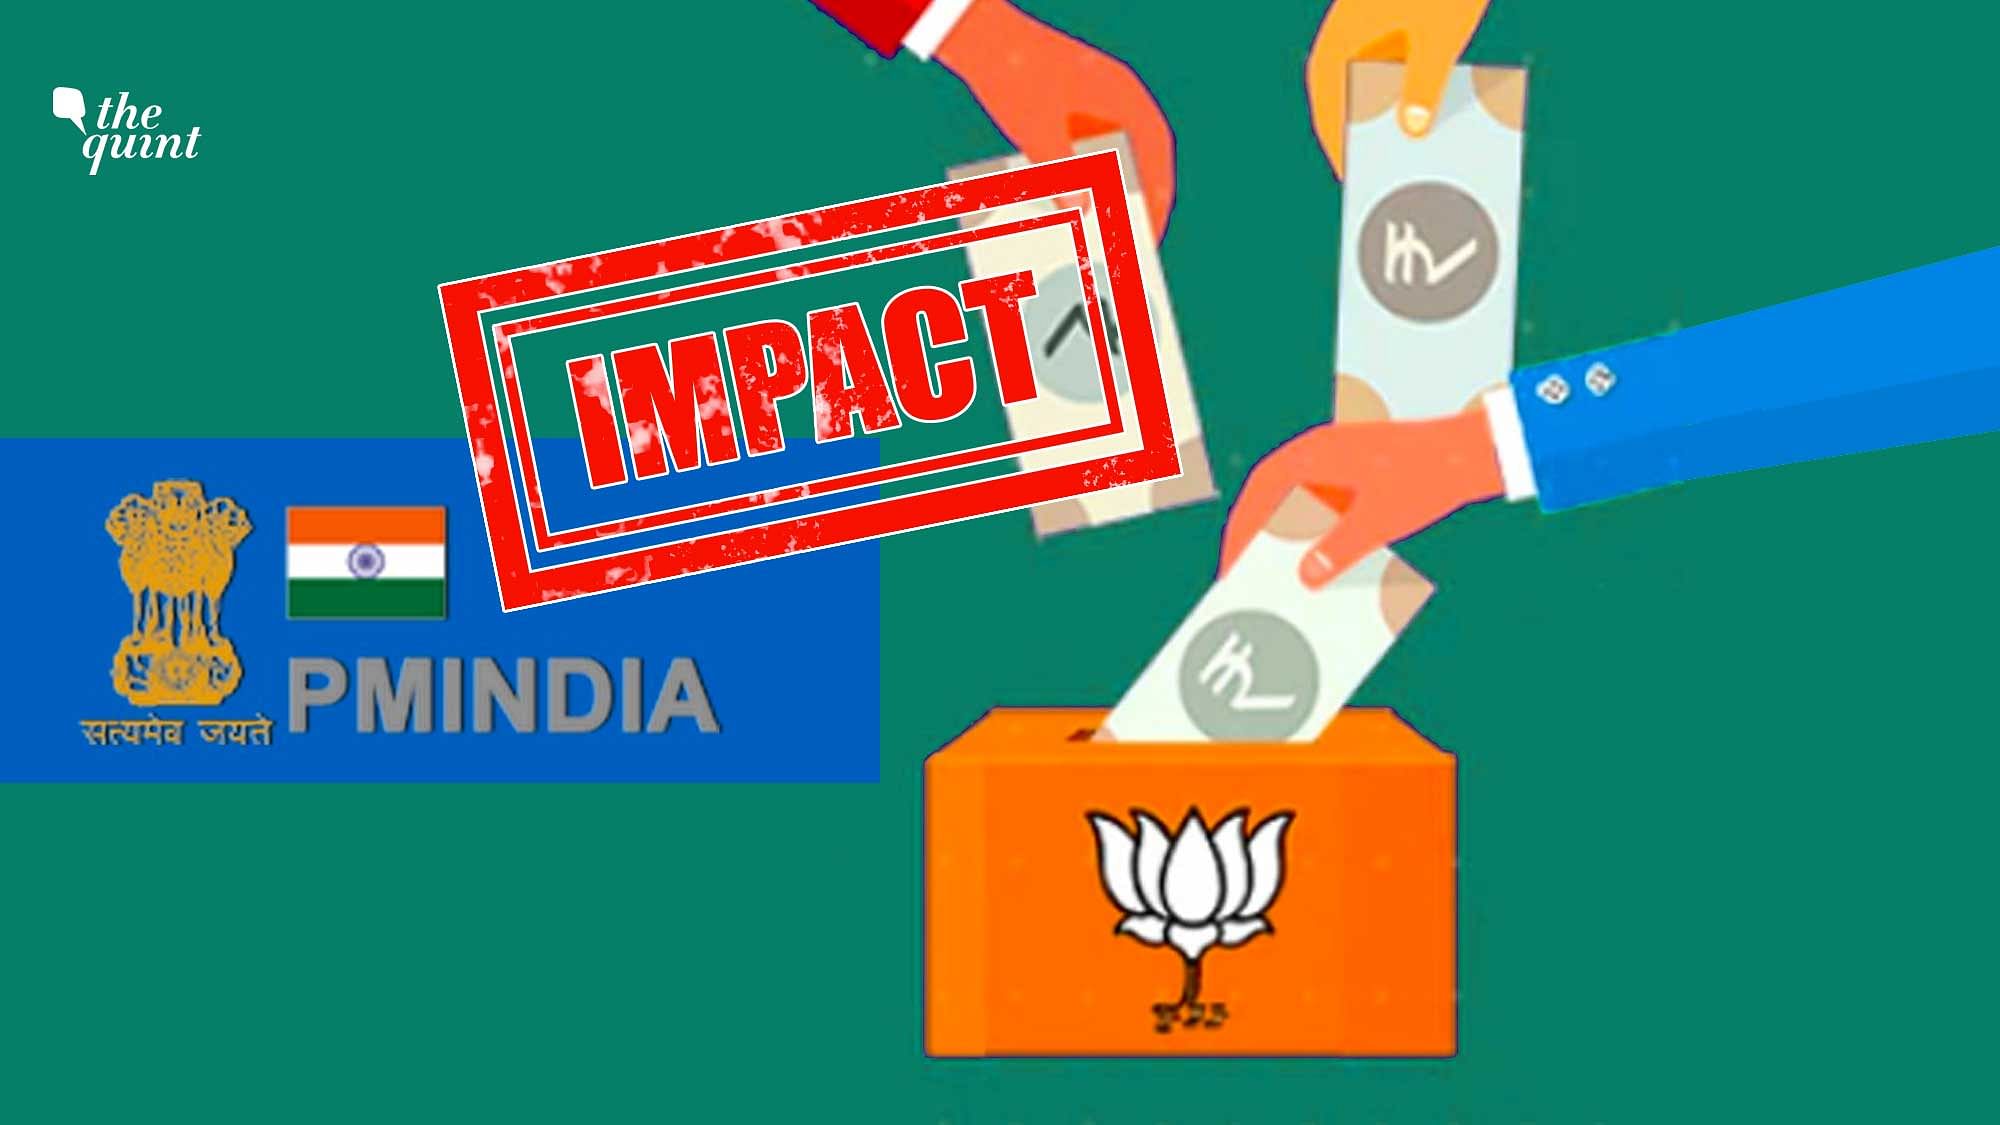 Impact | The Election Commission of India has received complaints of Model Code of Conduct violations based on The Quint’s report about how Prime Minister’s Office sent an email blast to allegedly collect funds for the BJP.